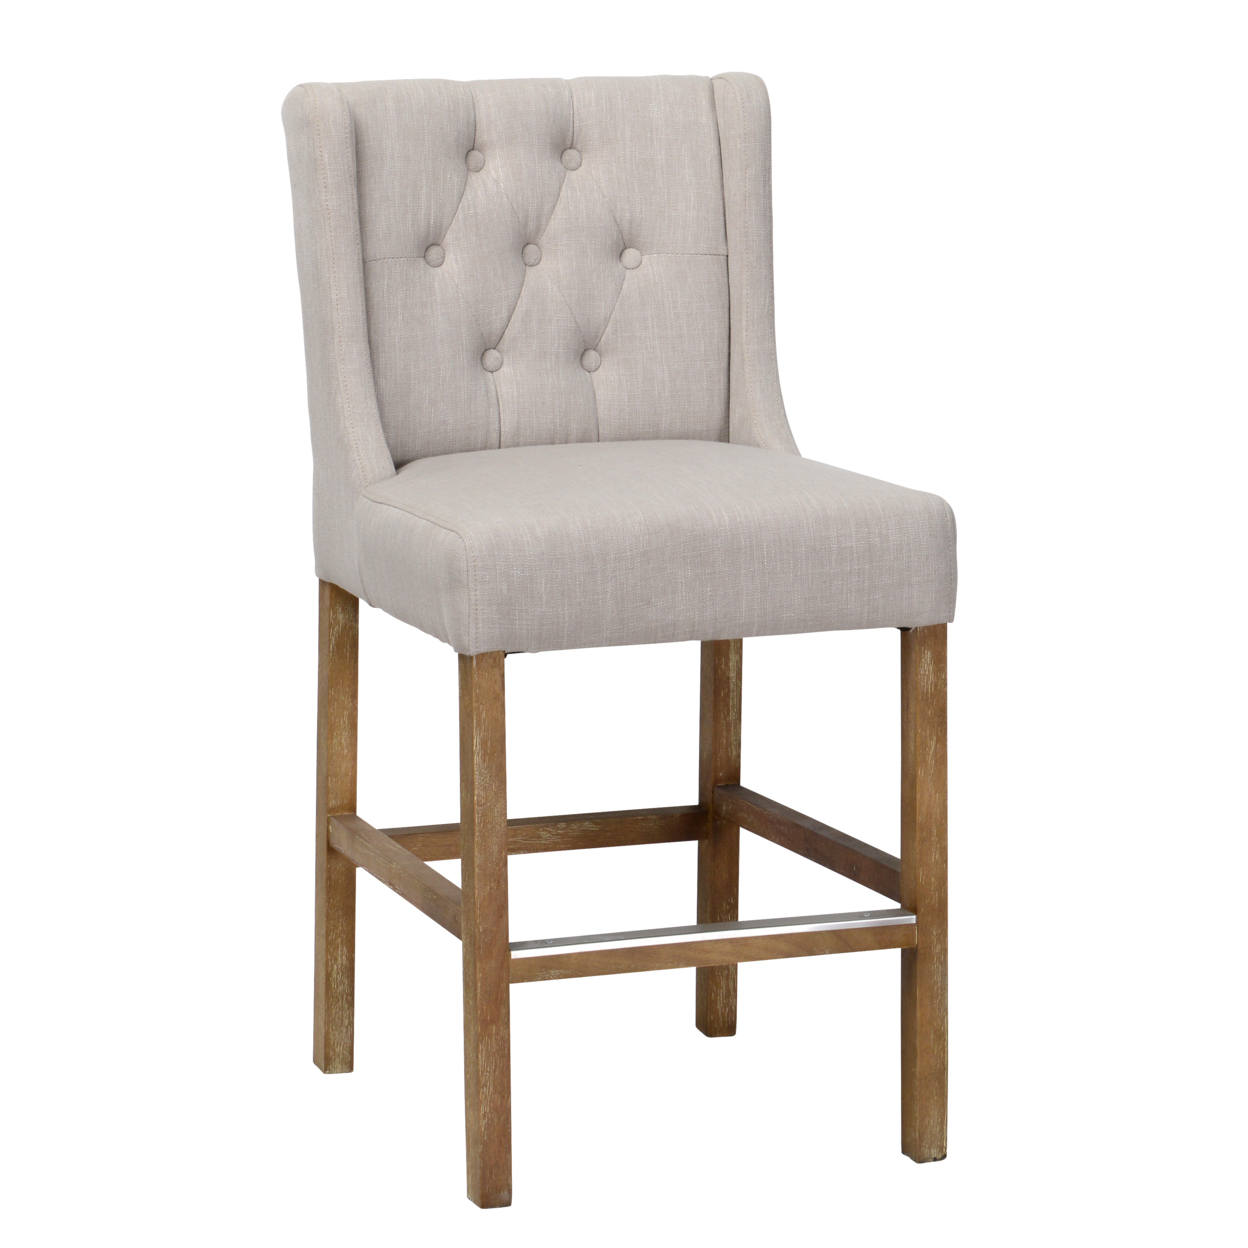 Wooden Counter Height Stool With Fabric Padded Seat And Tufted Wing Back, Beige And Brown- Saltoro Sherpi